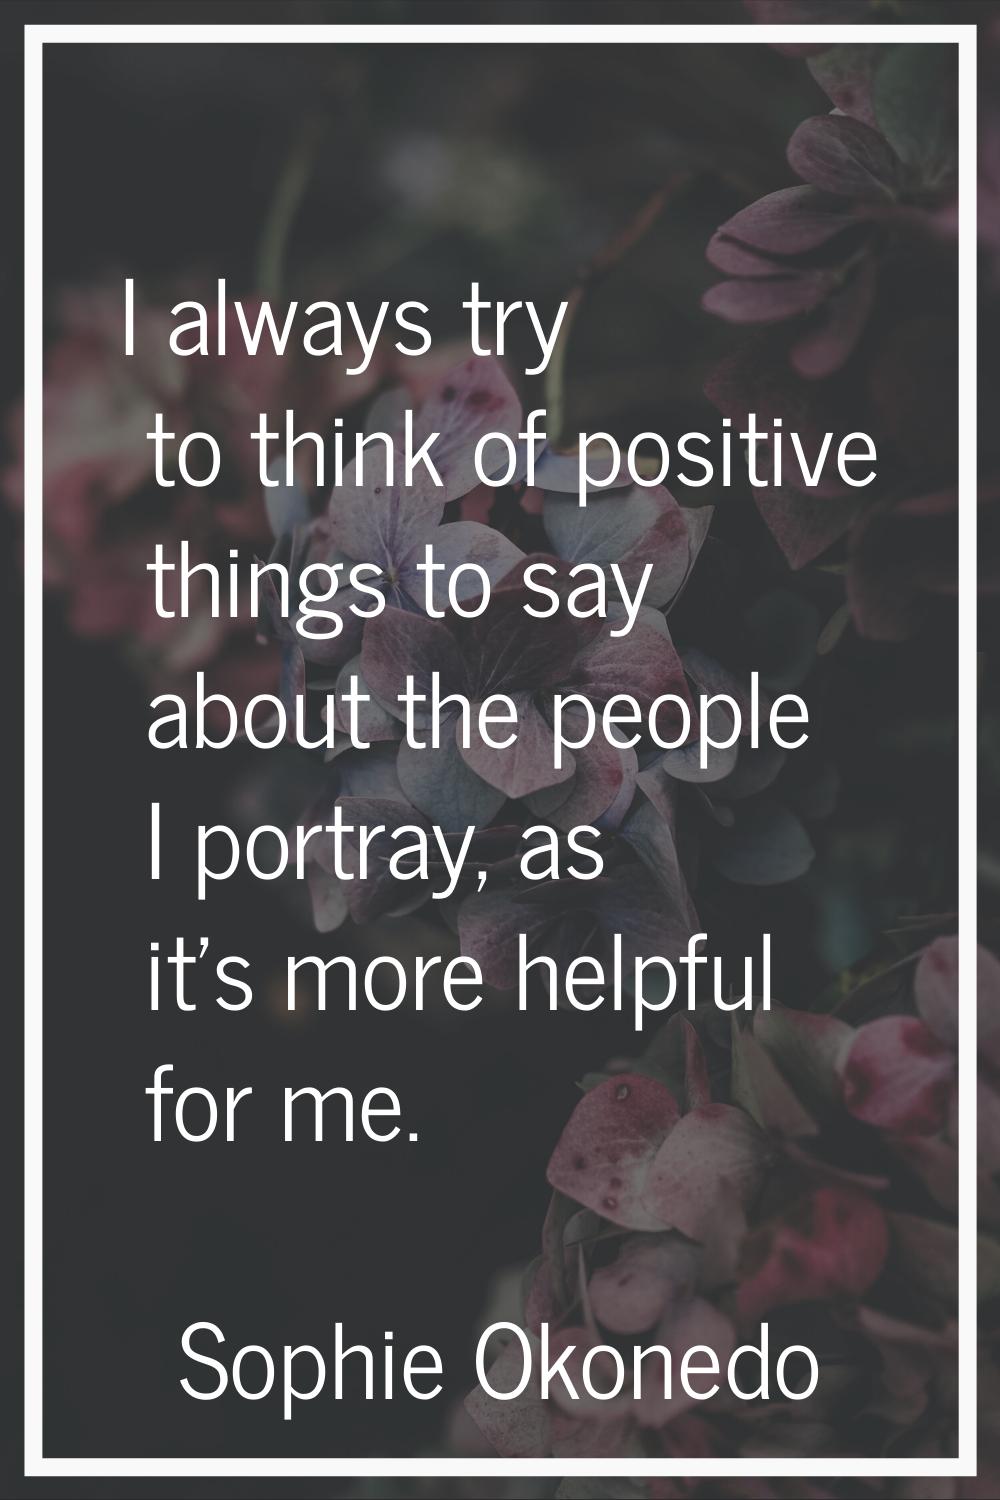 I always try to think of positive things to say about the people I portray, as it's more helpful fo